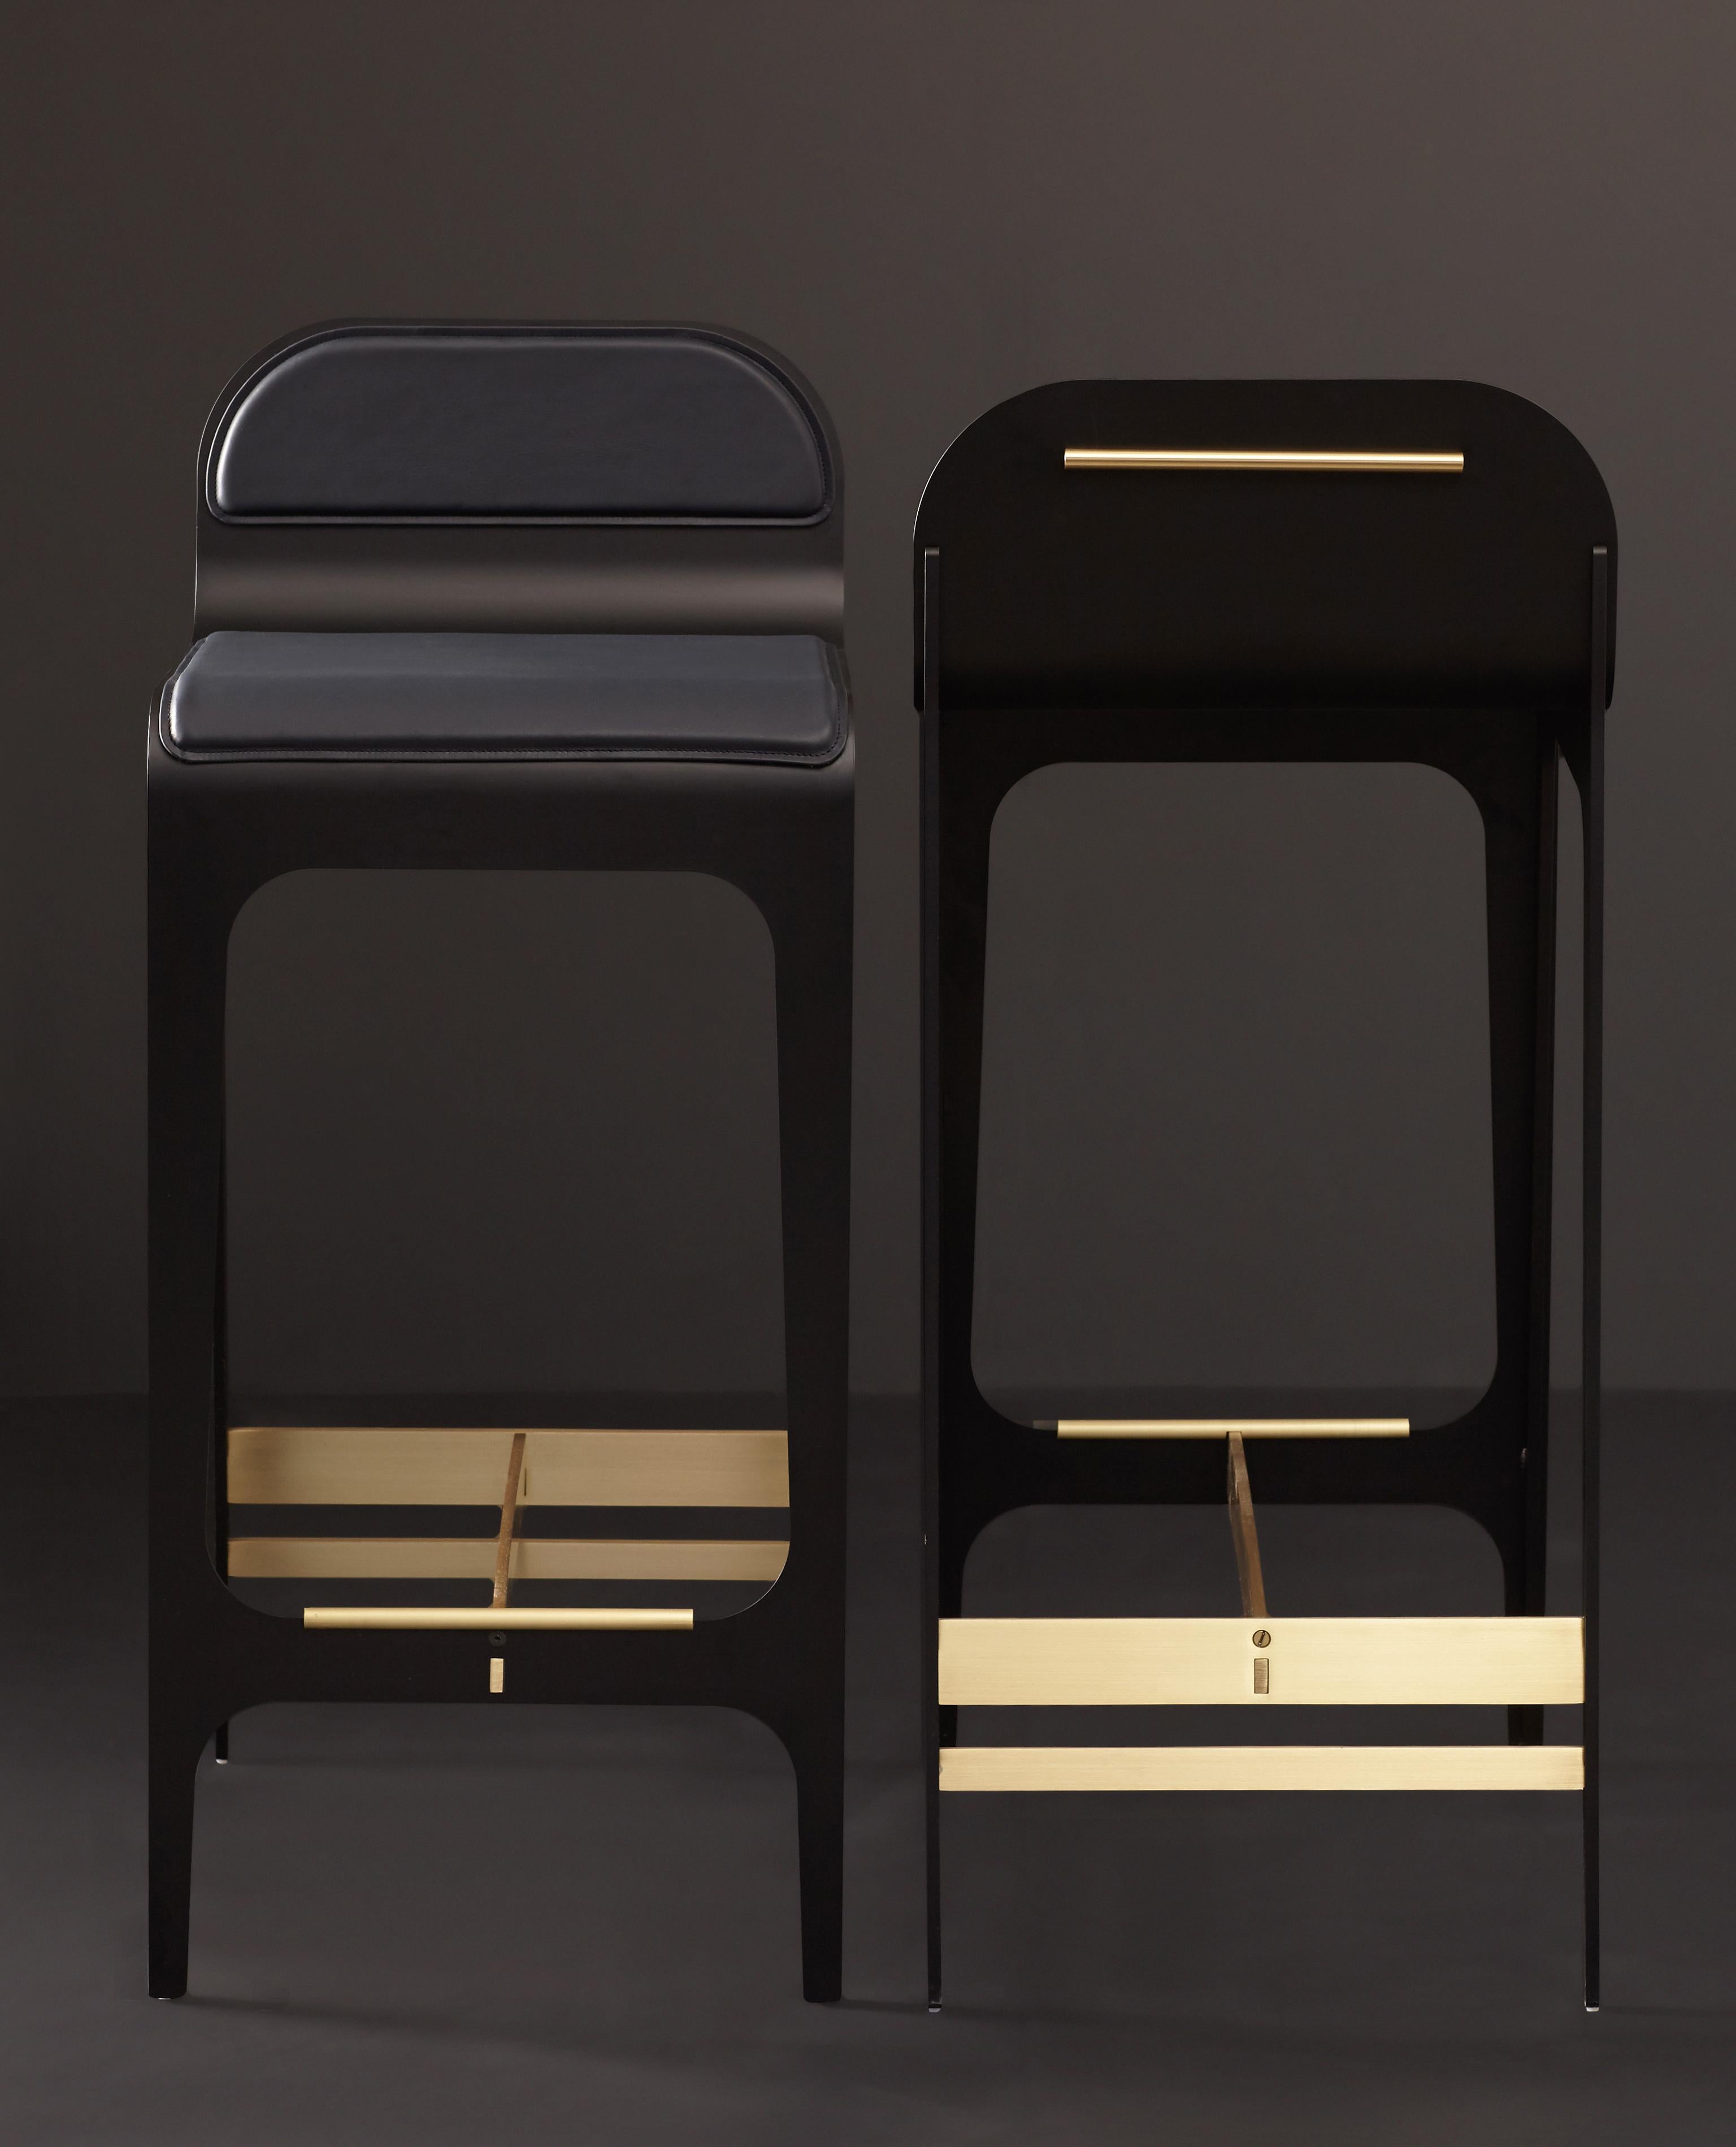 The epitome of chic, with distinct legs and a beautiful silhouette, the Bardot series is aptly named after the French style icon. Strutting atop a base of black steel with distinct brass, copper, or nickel hardware; thin profiled seats and back